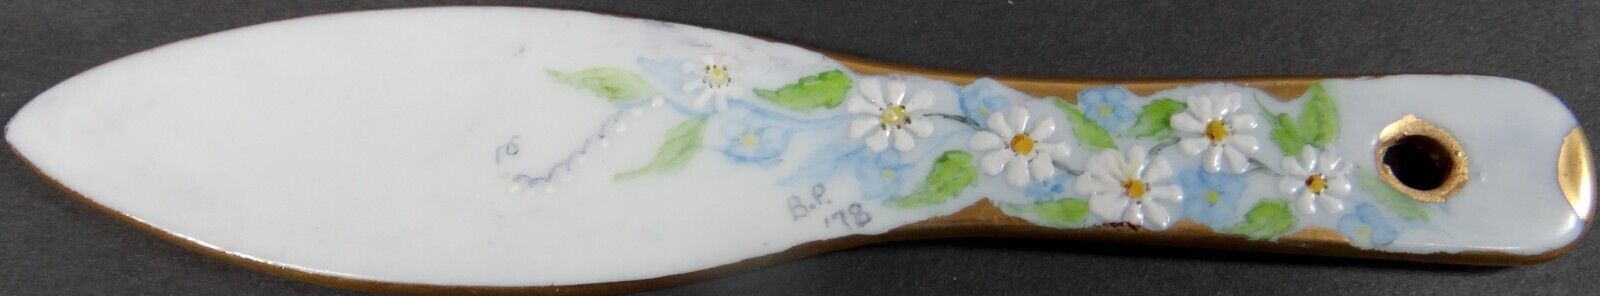 Vtg Butter Knife Cheese Server Brie Hand Painted Ceramic Porcelain Daisies 1978